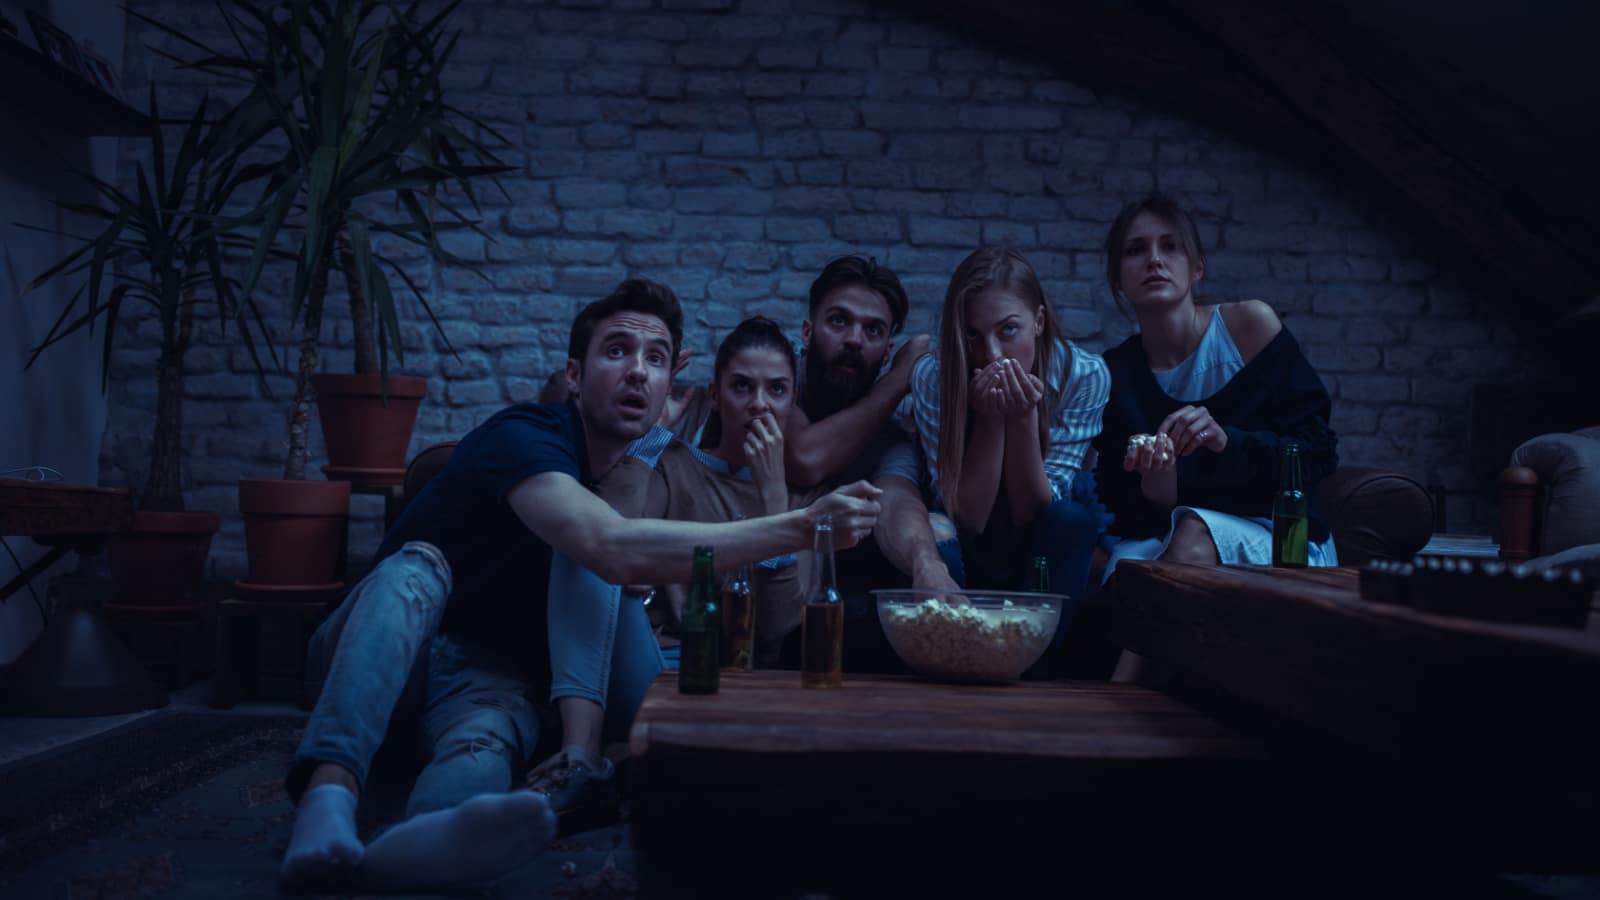 Group of friend watching scary movie at home